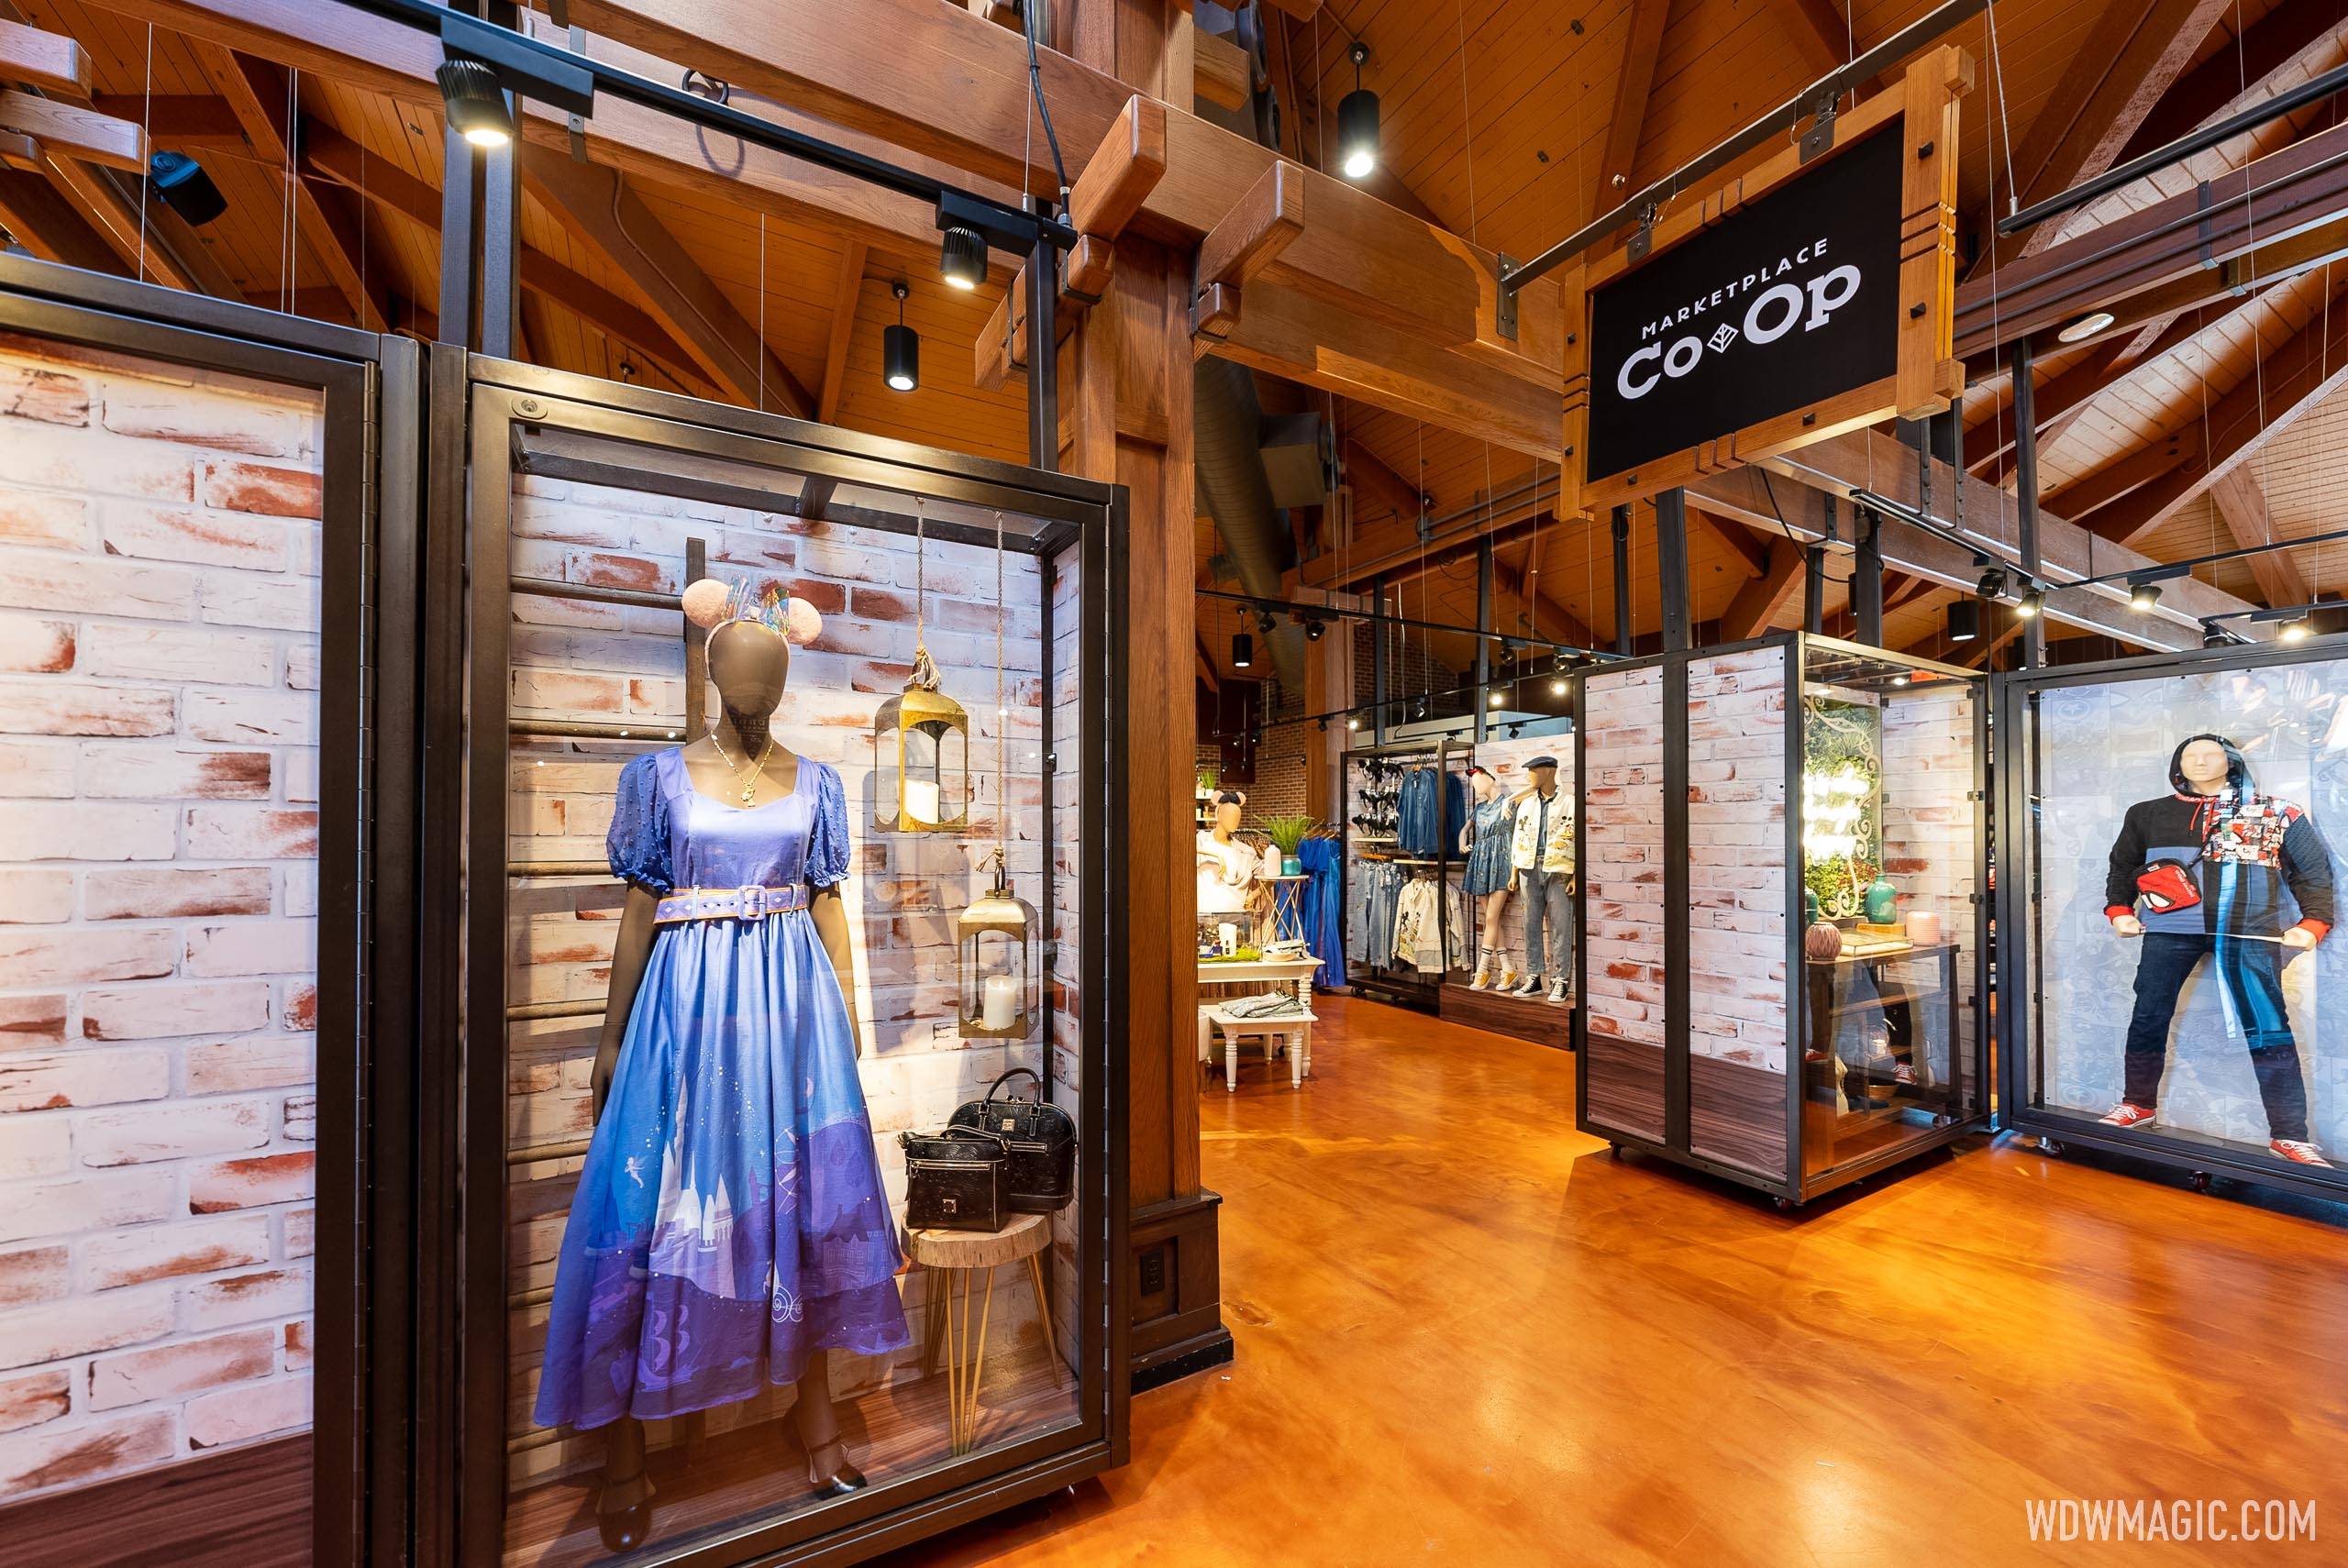 The Dress Shop returns to Disney Springs at the Marketplace Co-Op in Walt Disney World